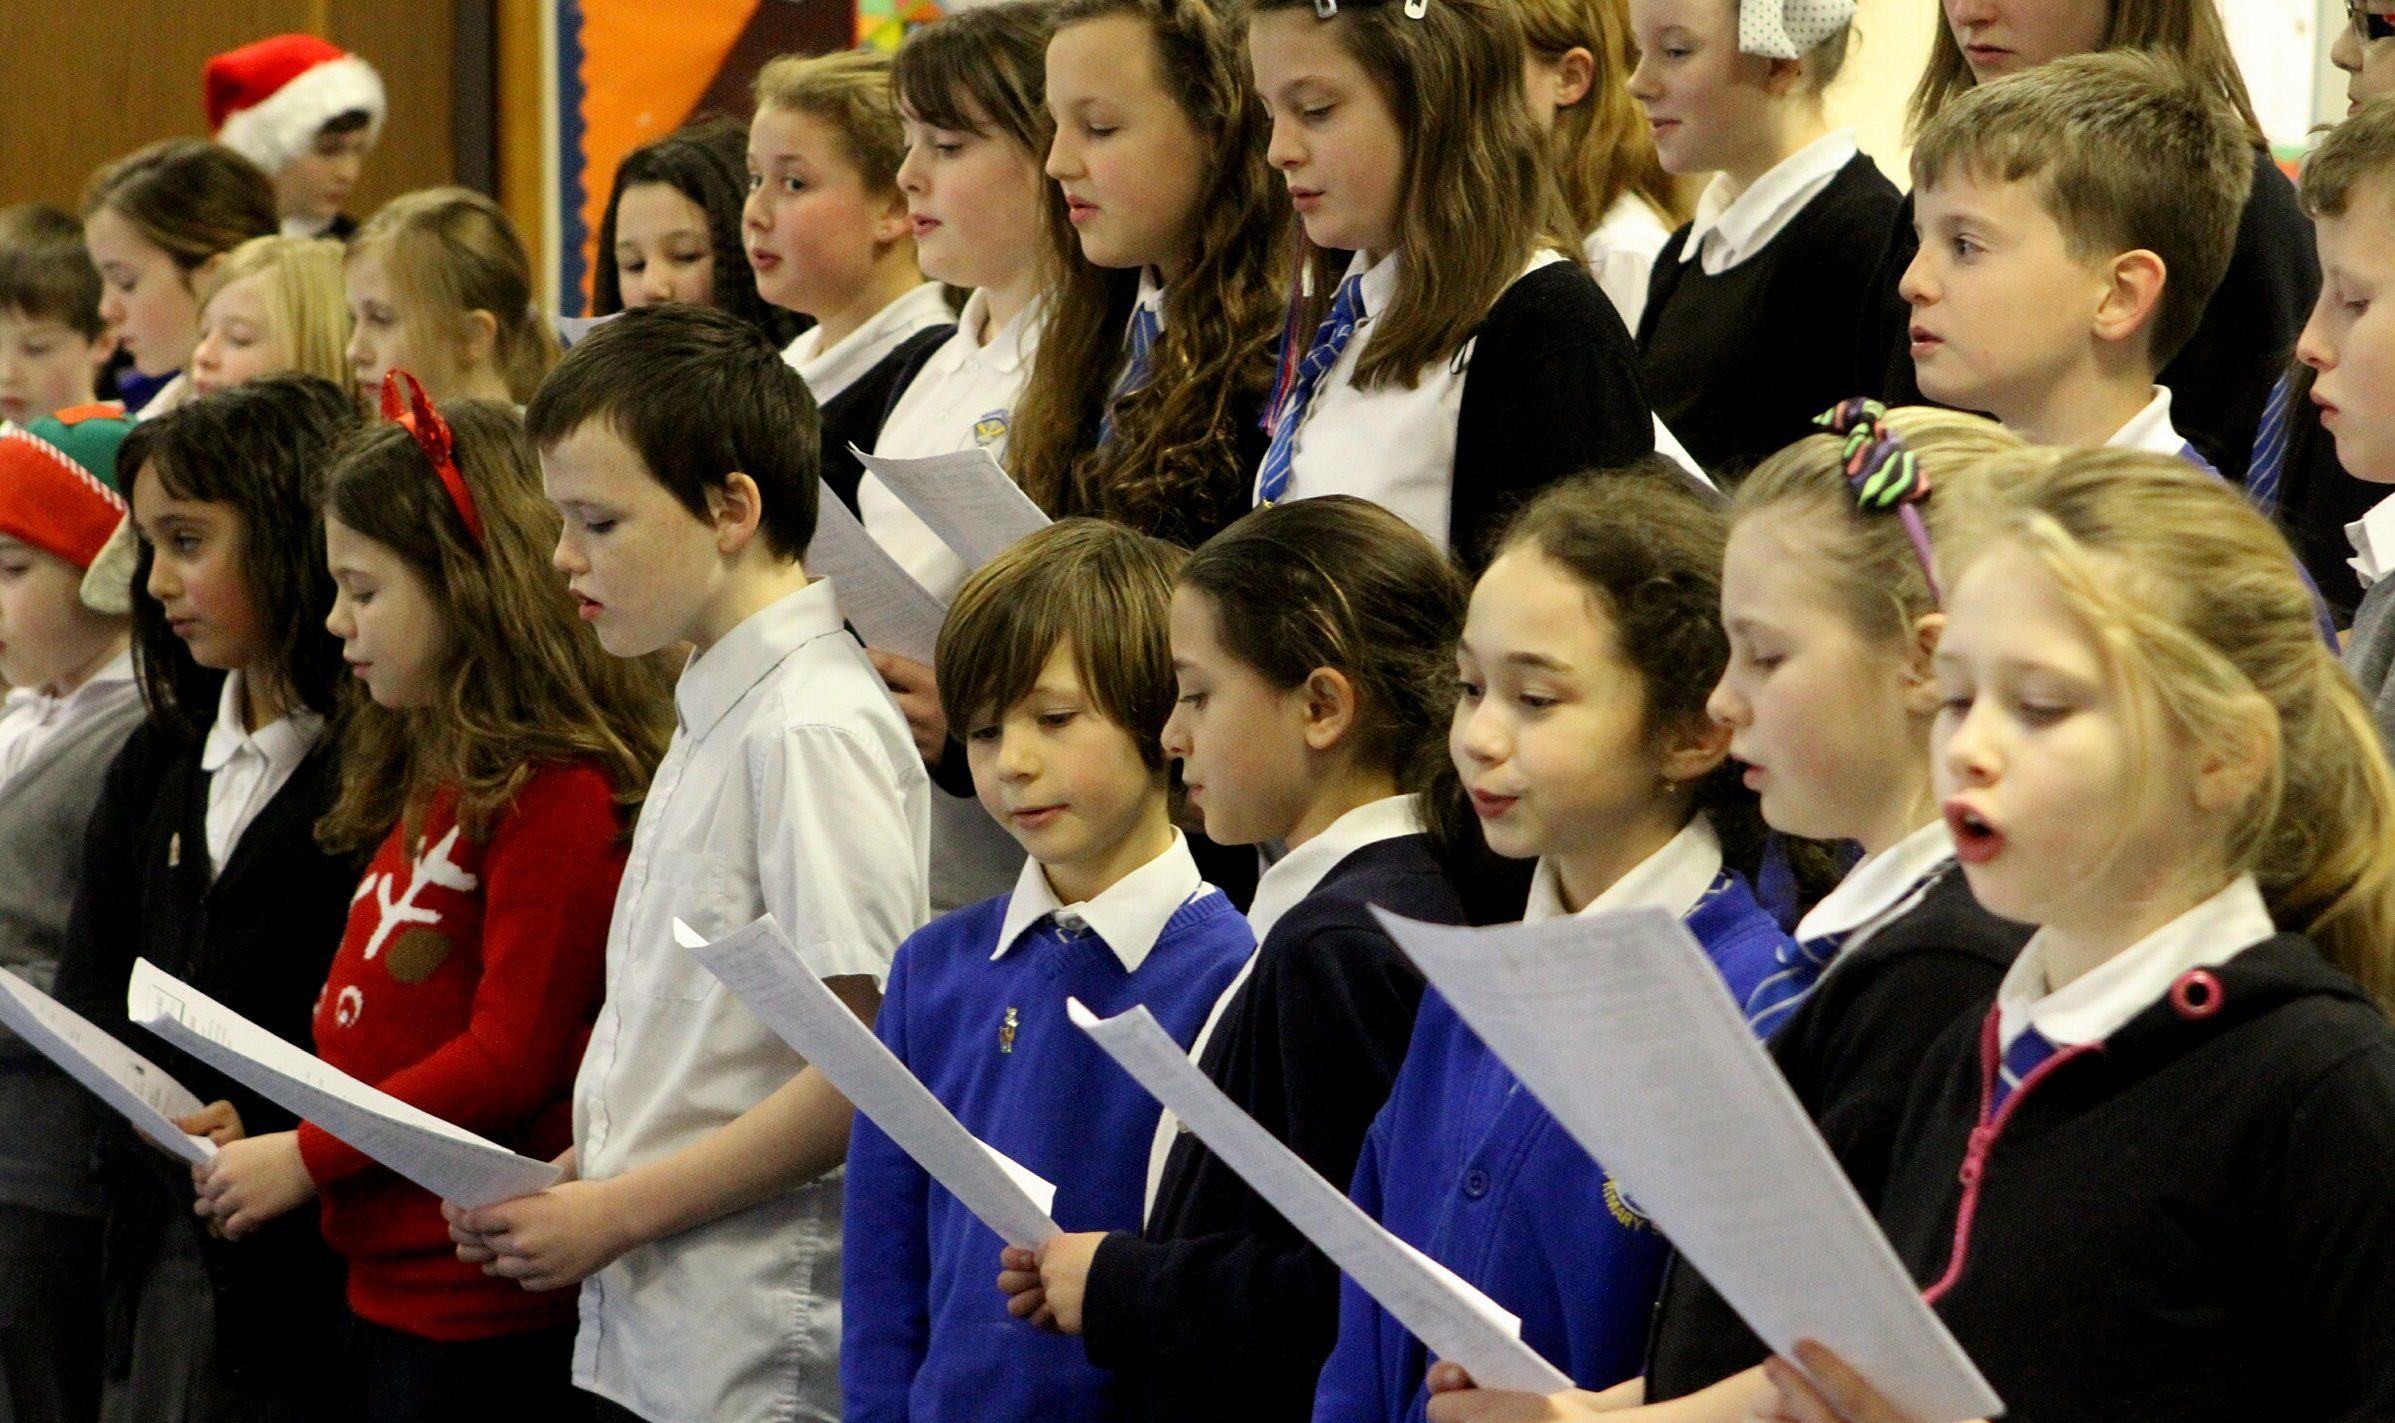 Pictured at Muirfield Primary School in Arbroath in December 2013, are some of the pupils taking part in the school's Christmas assembly.